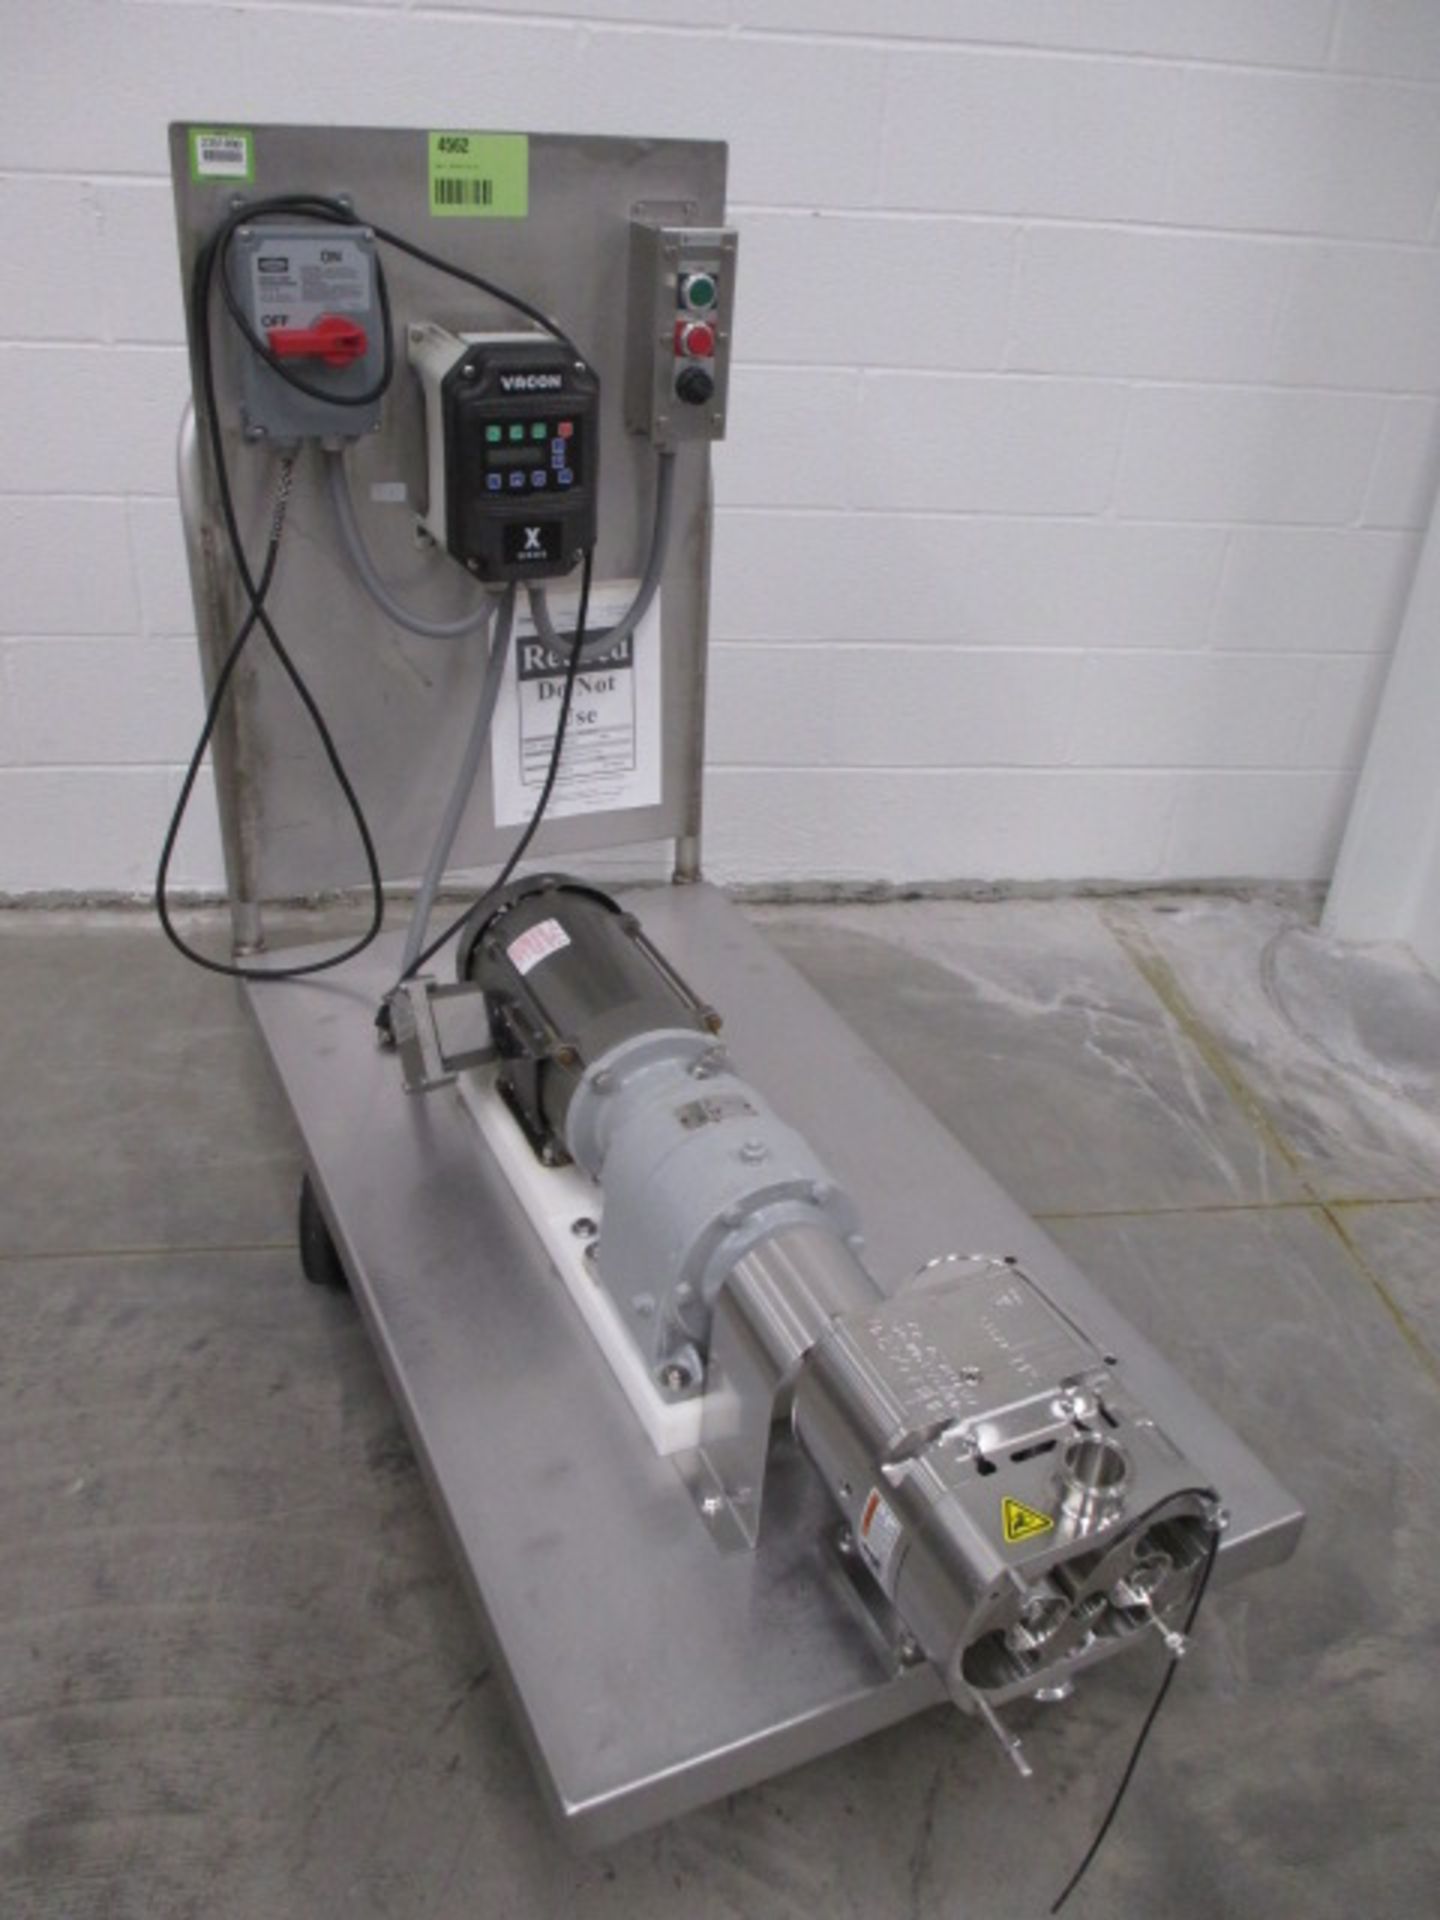 Flowtech Positive Displacement Pump Skid with Uniblock-PD 400 Stainless Steel Rotary Lobe Pump,